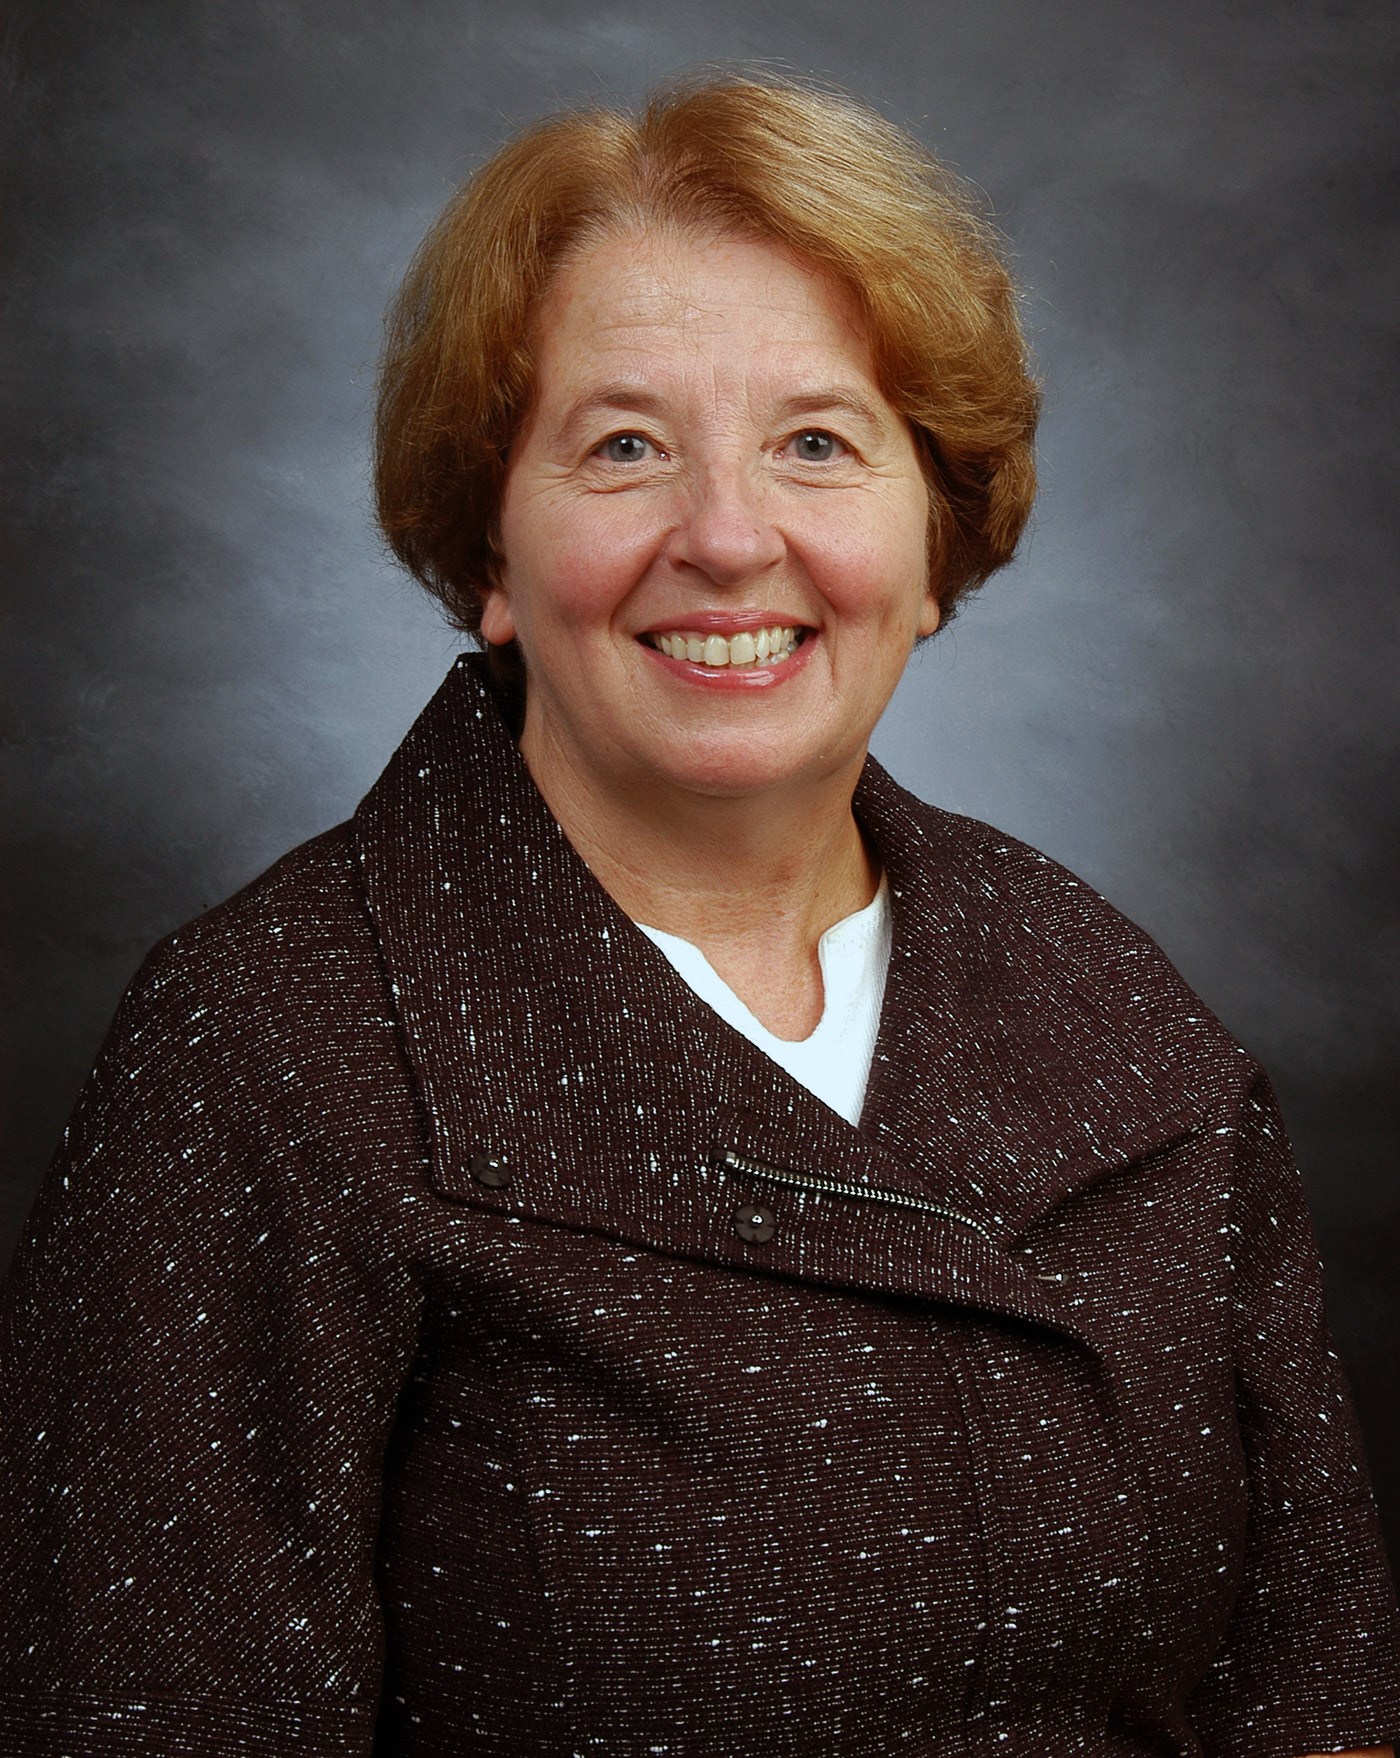 Kathleen (Kay) Doyle, Ph.D., M.S., MLS (ASCP) CM is a Professor Emeritus in the Biomedical and Nutritional Sciences Department at UMass Lowell.